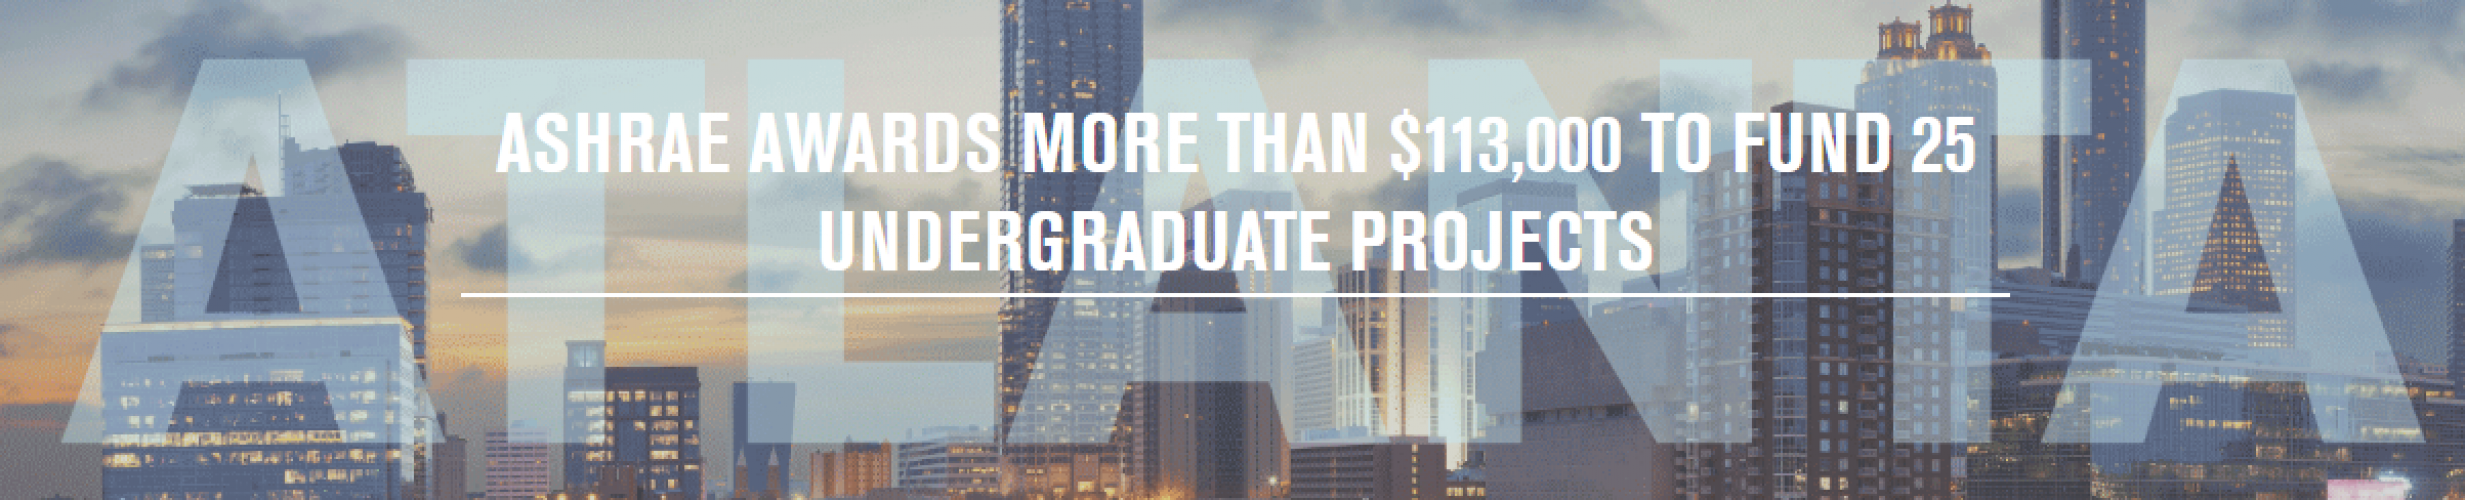 ashrae-awards-more-than-$113,000-to-fund-25-undergraduate-projects